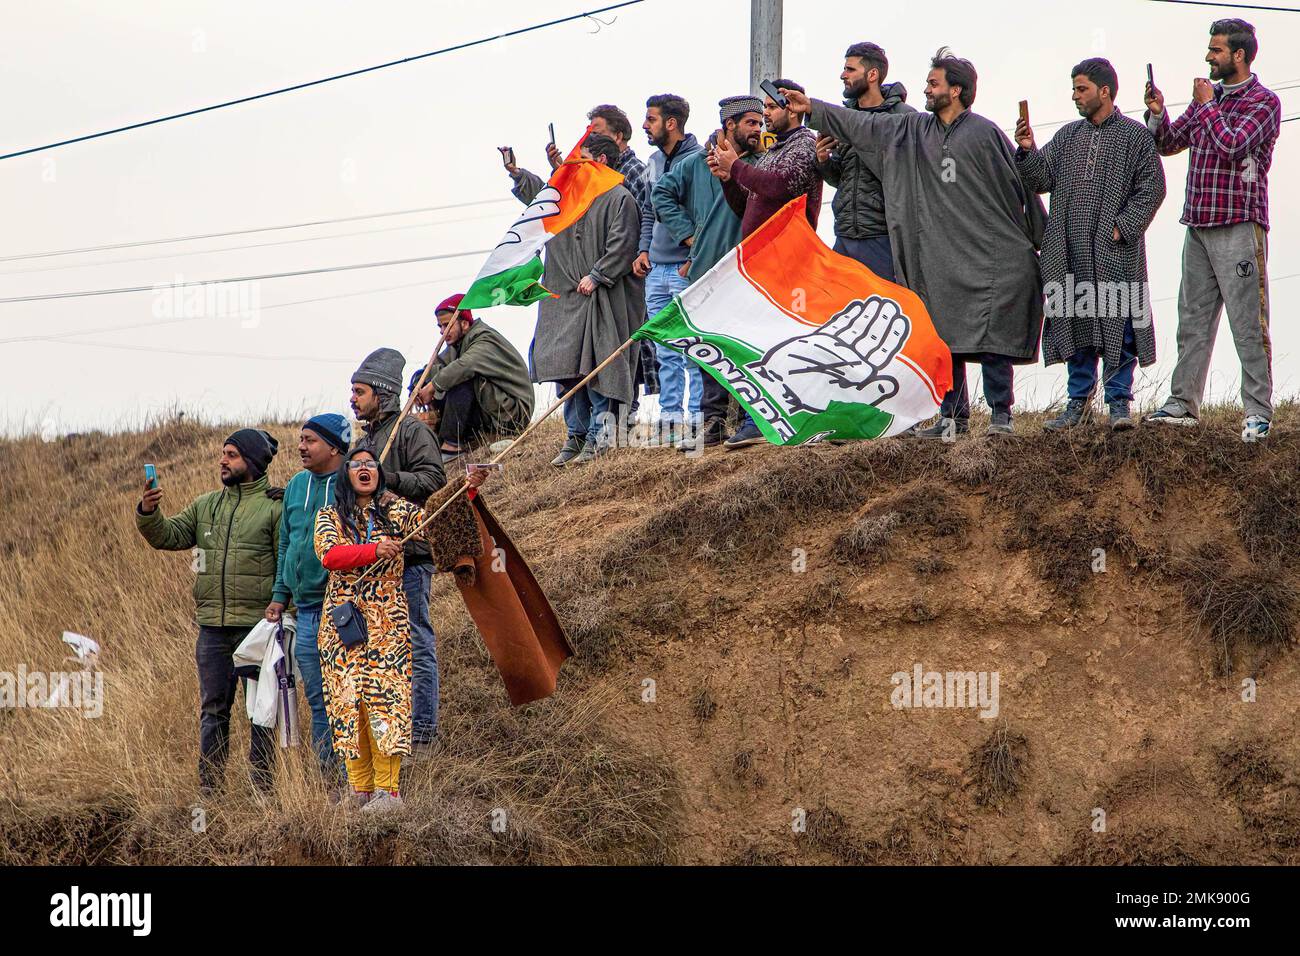 January 27, 2023, Srinagar, Jammu and Kashmir, India: Supporters of Indian Congress Leader Rahul Gandhi waves party flags during the ''Bharat Jodo Yatra'' or (Unite March India) in Anantnag South Kashmir. The march is an ongoing mass movement, began on 7th September, 2022 organized by the Indian National Congress (a major political party in India) led by party leader Rahul Gandhi who along with his supporters, part of his five month long (3,570km) (2,218 mile) over 150 days countrywide foot march through 12 states from Kanyakumari in Southern India to Kashmir in North India. The march is joine Stock Photo